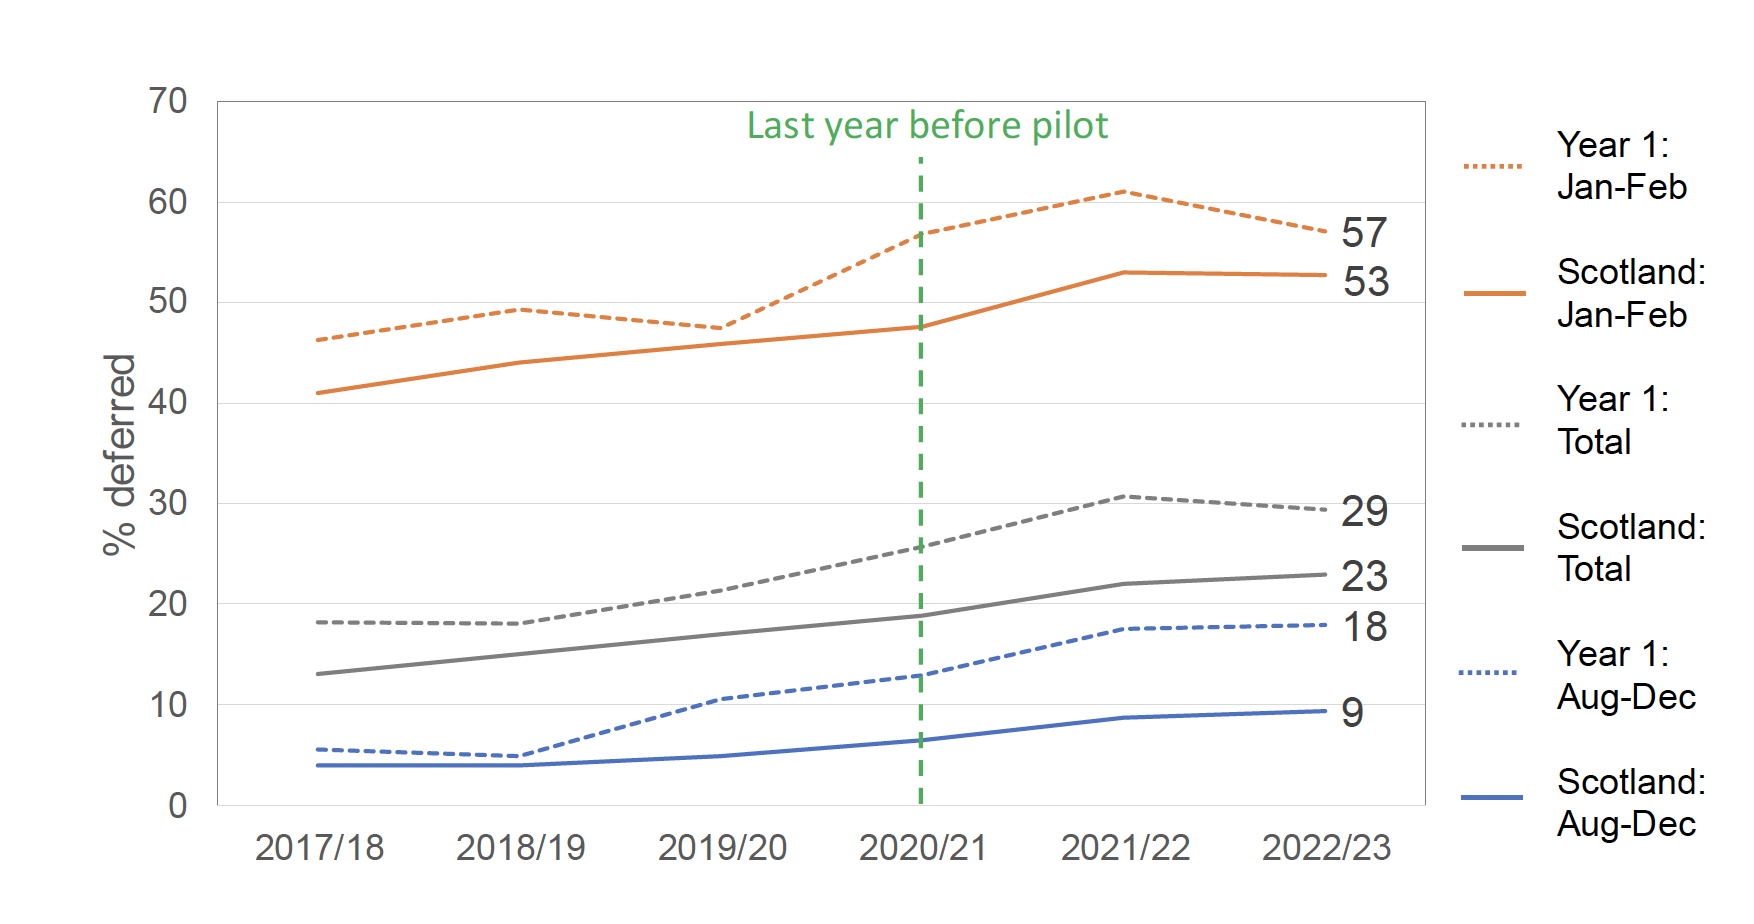 Figure 2.1 is a line chart showing August-December deferral rates for 2017/18 to 2022/23. It compares data for Scotland with that for Year 1 pilot areas. It shows some increases in the deferral rate in Year 1 areas since the pilot was implemented in 2020/21.